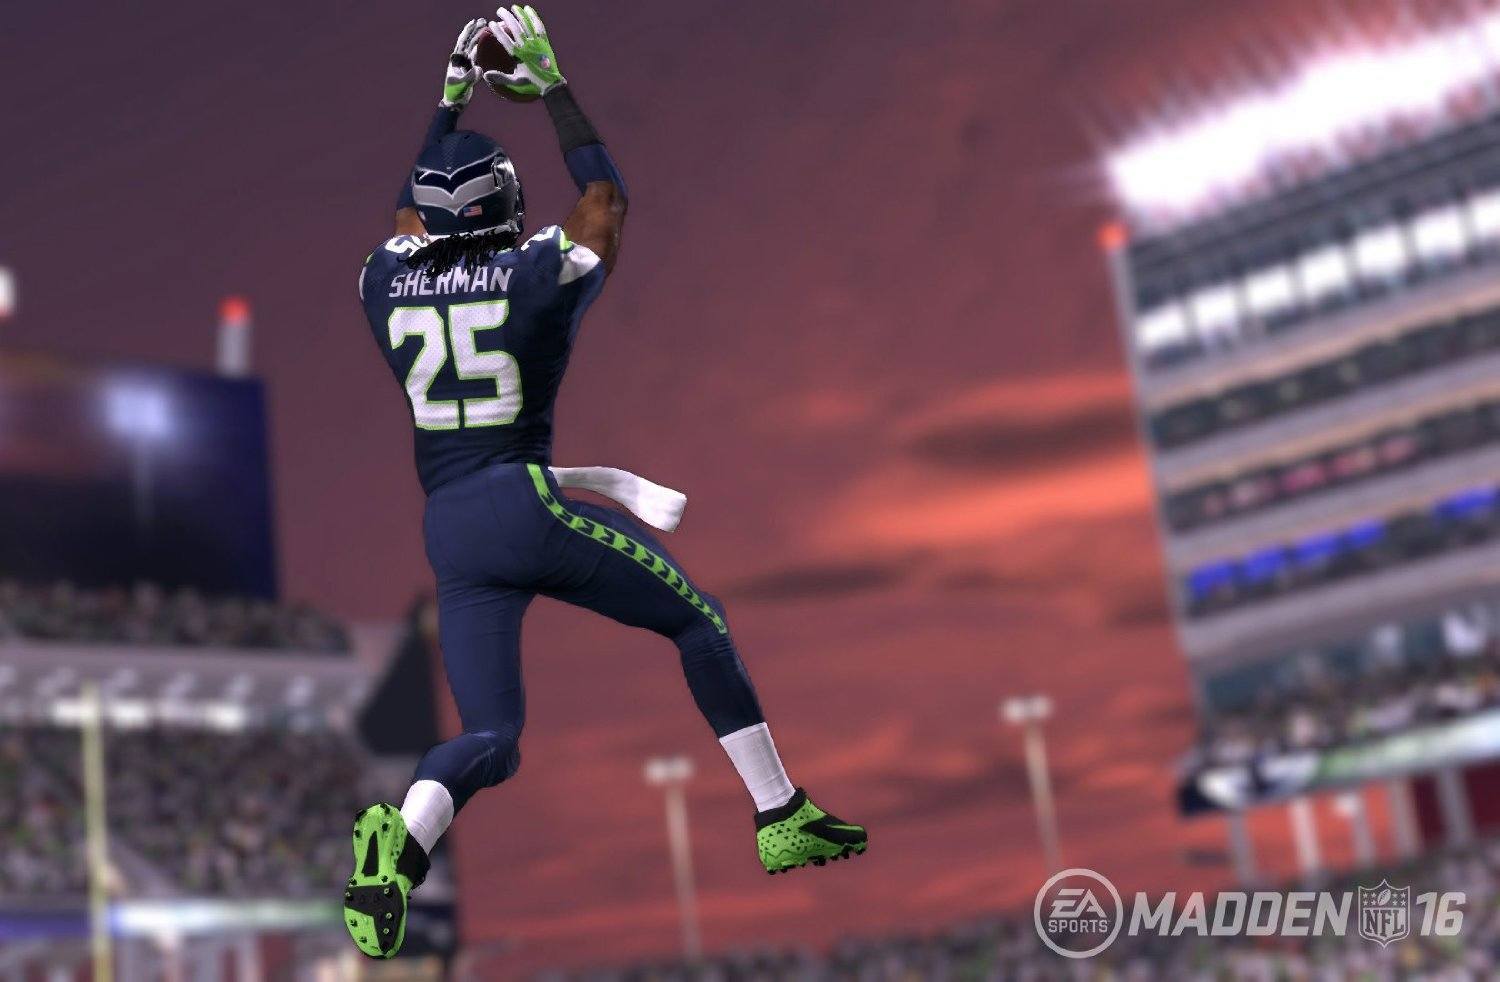 Check out the latest Madden 16 details to arrive.